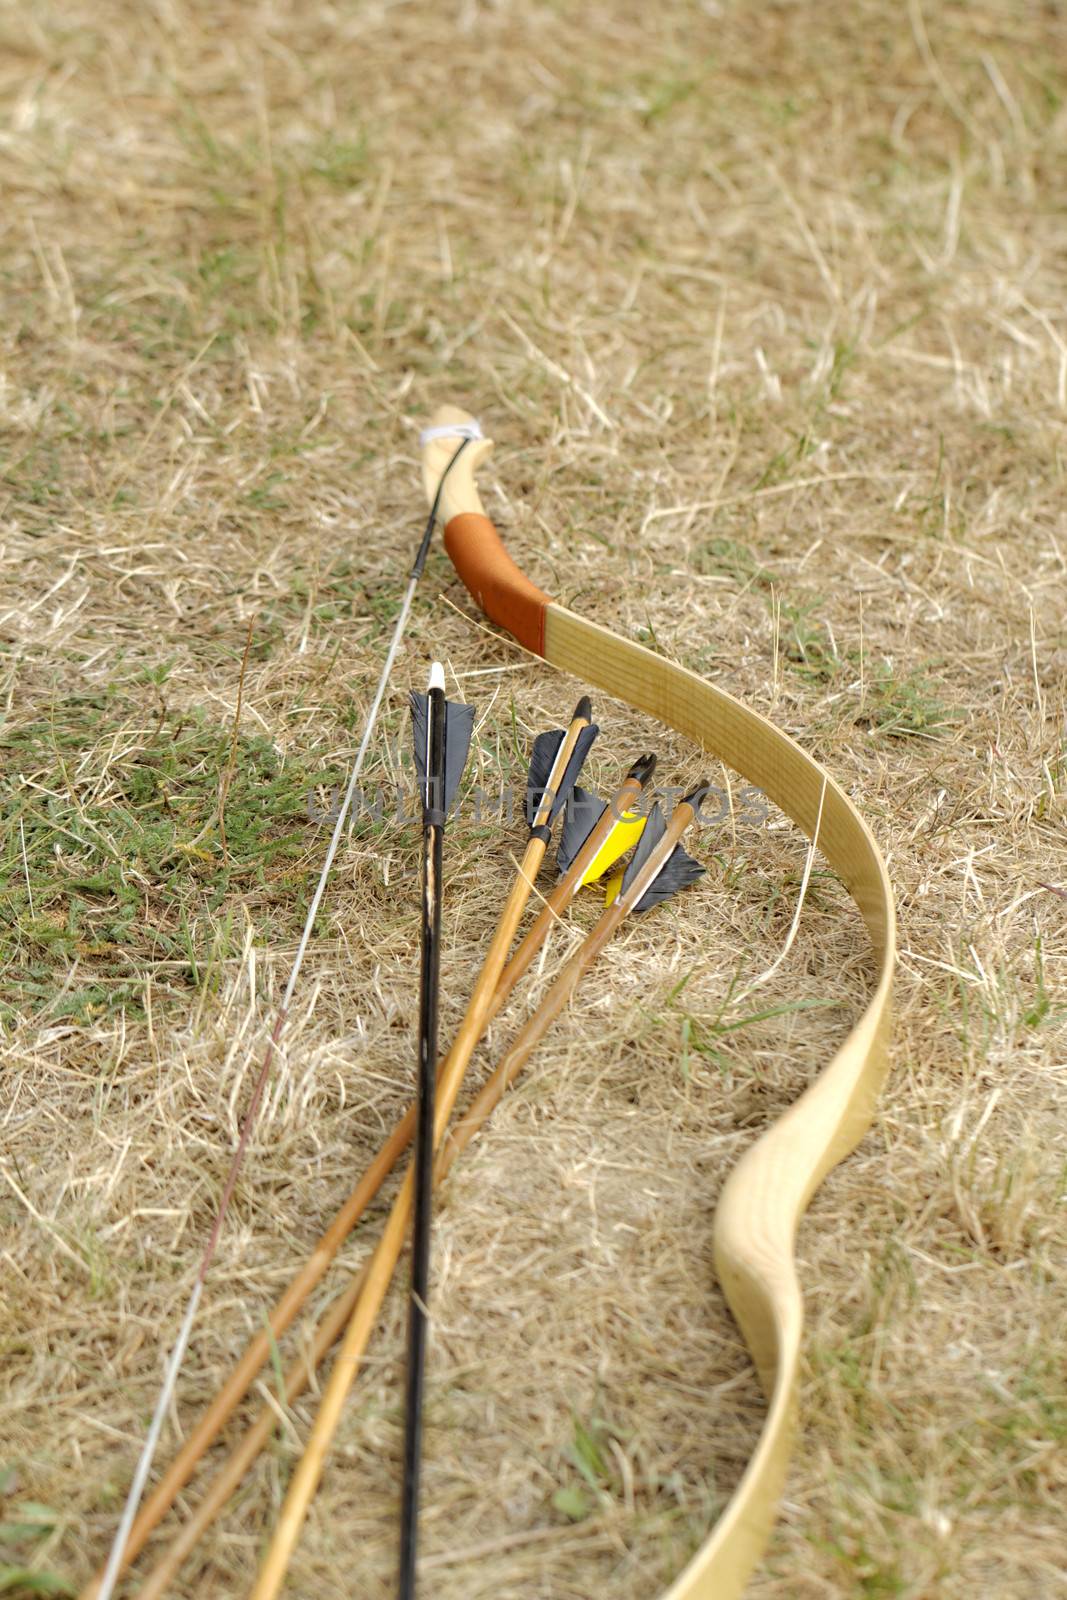 color archery arrows and bow in nature on the ground